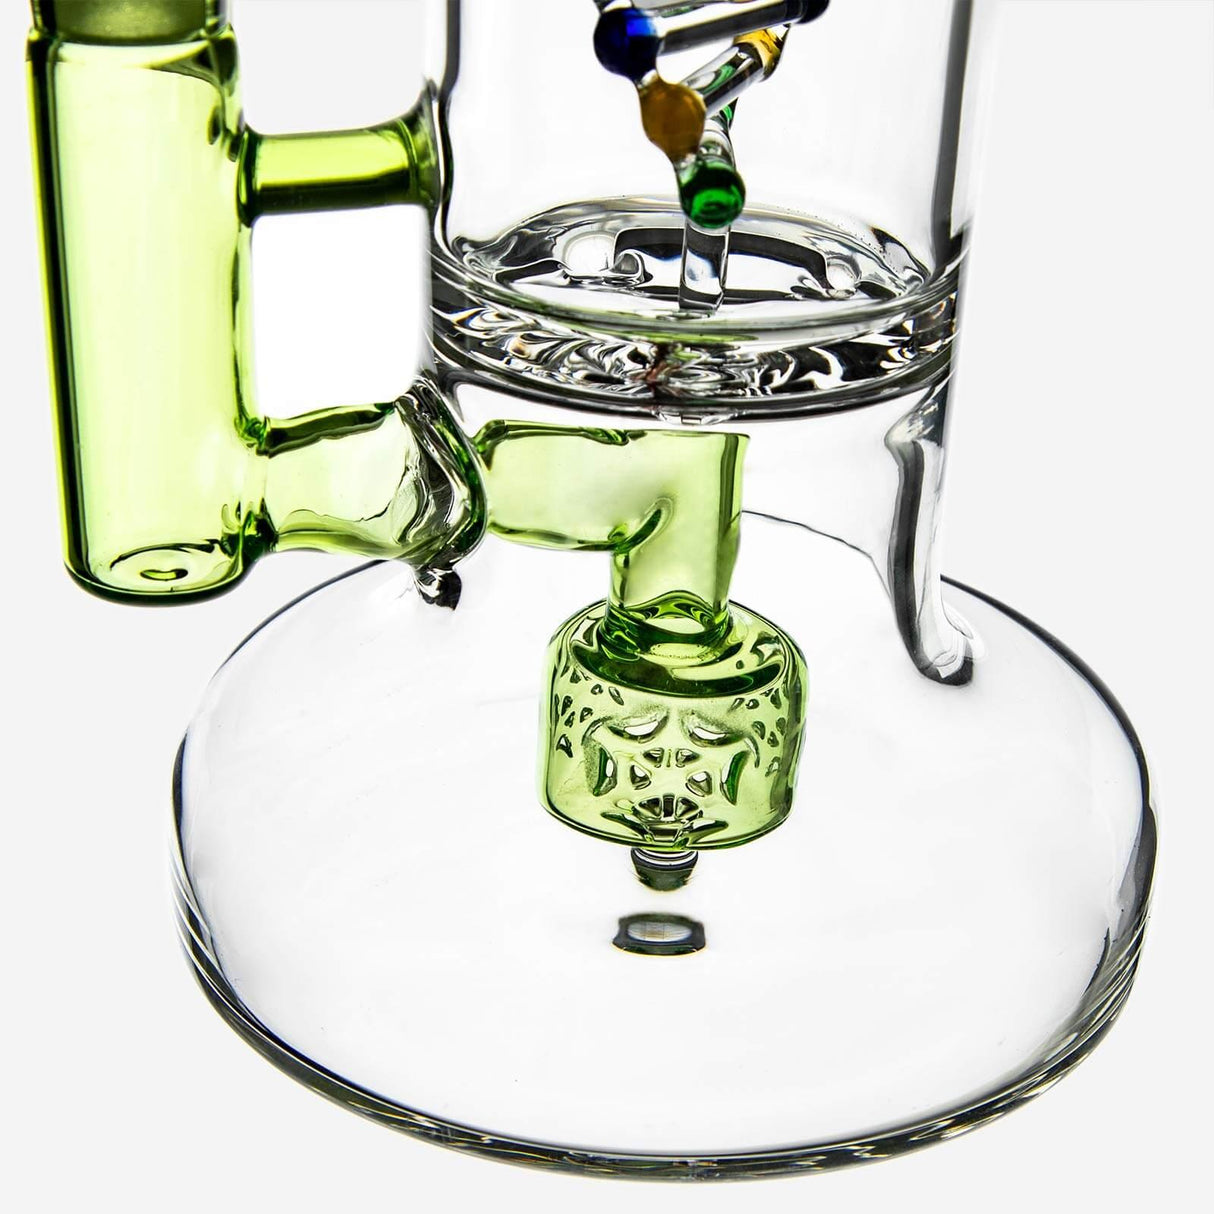 PILOTDIARY DNA Bong close-up showing intricate percolator and sturdy base